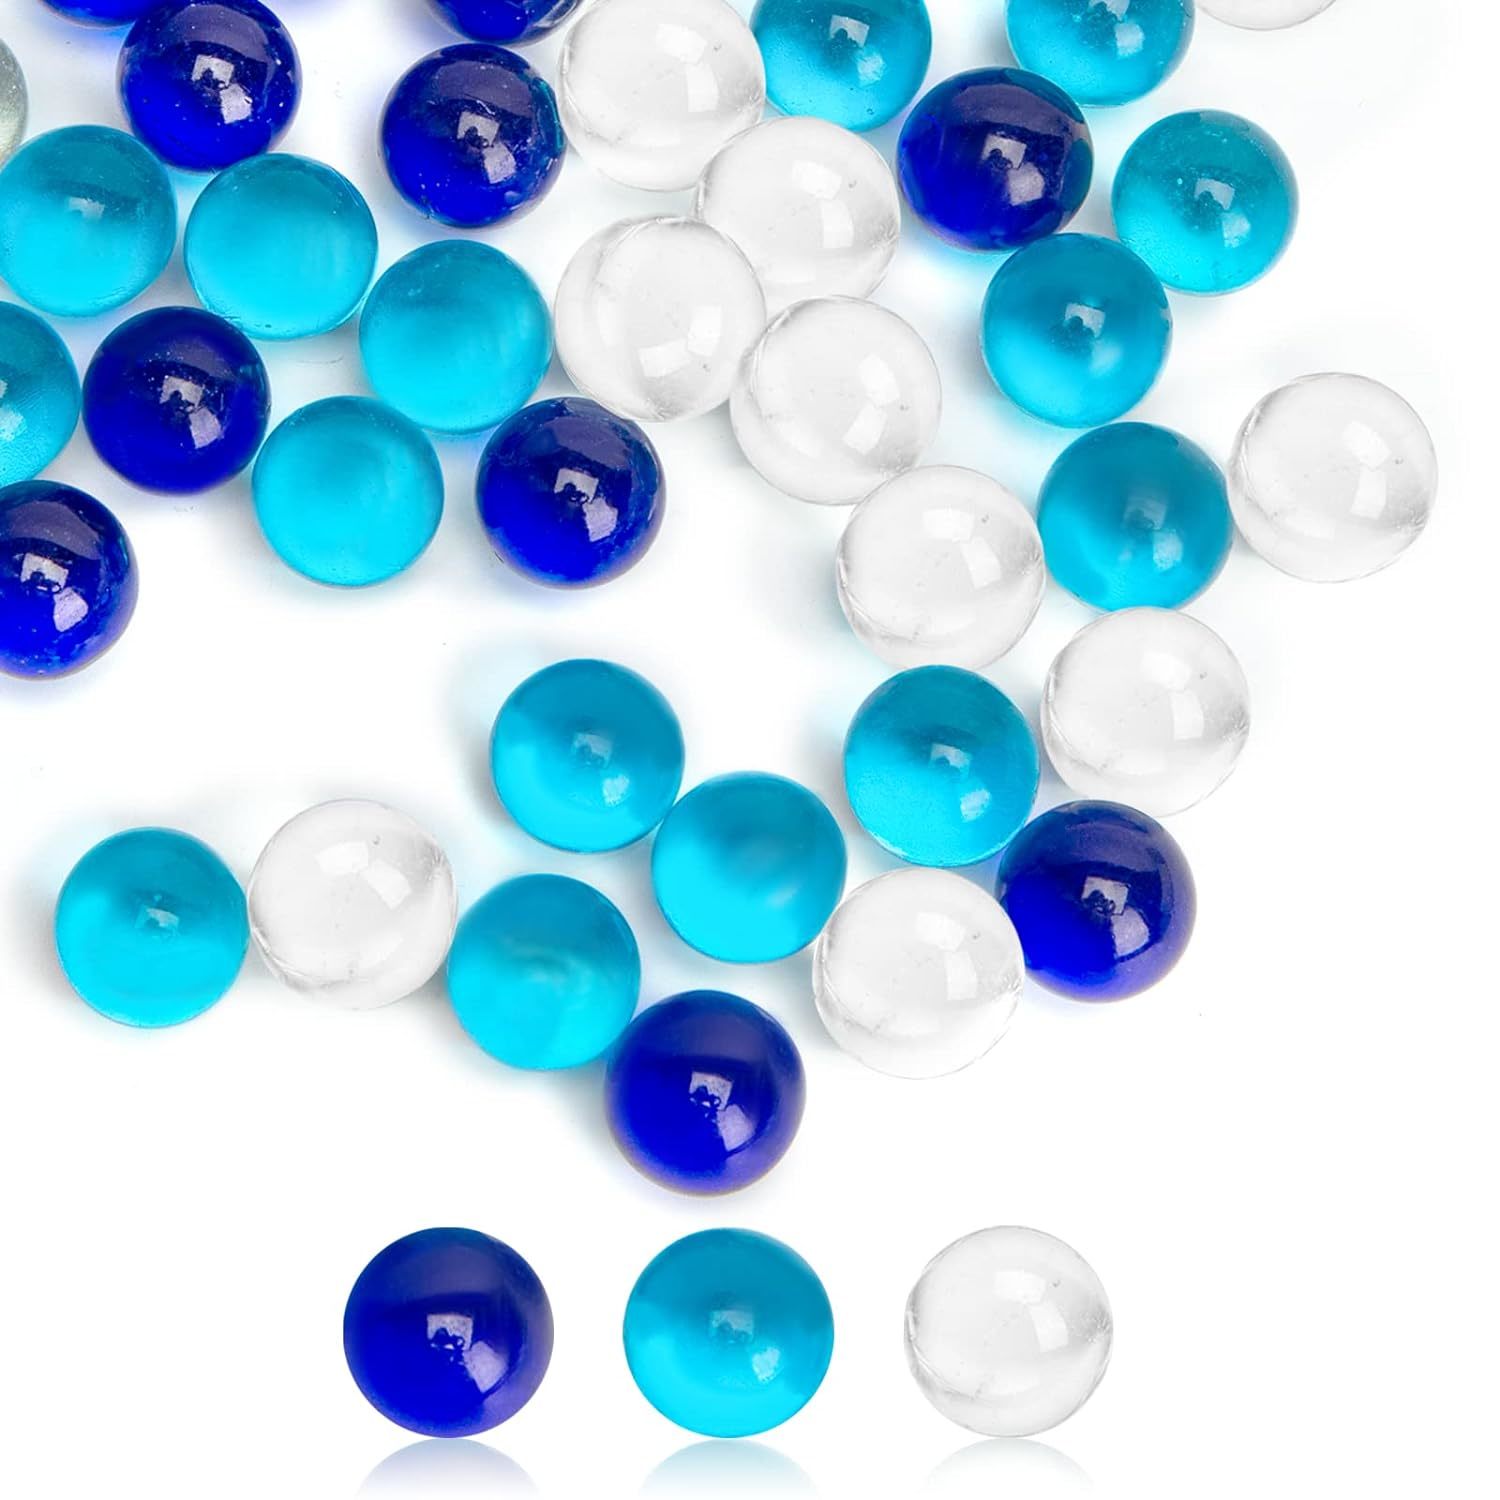 Primary image for Marbles Bulk, 75 Pcs Glass Marbles Blue Marbles Set Ocean Theme For Kids Marble 